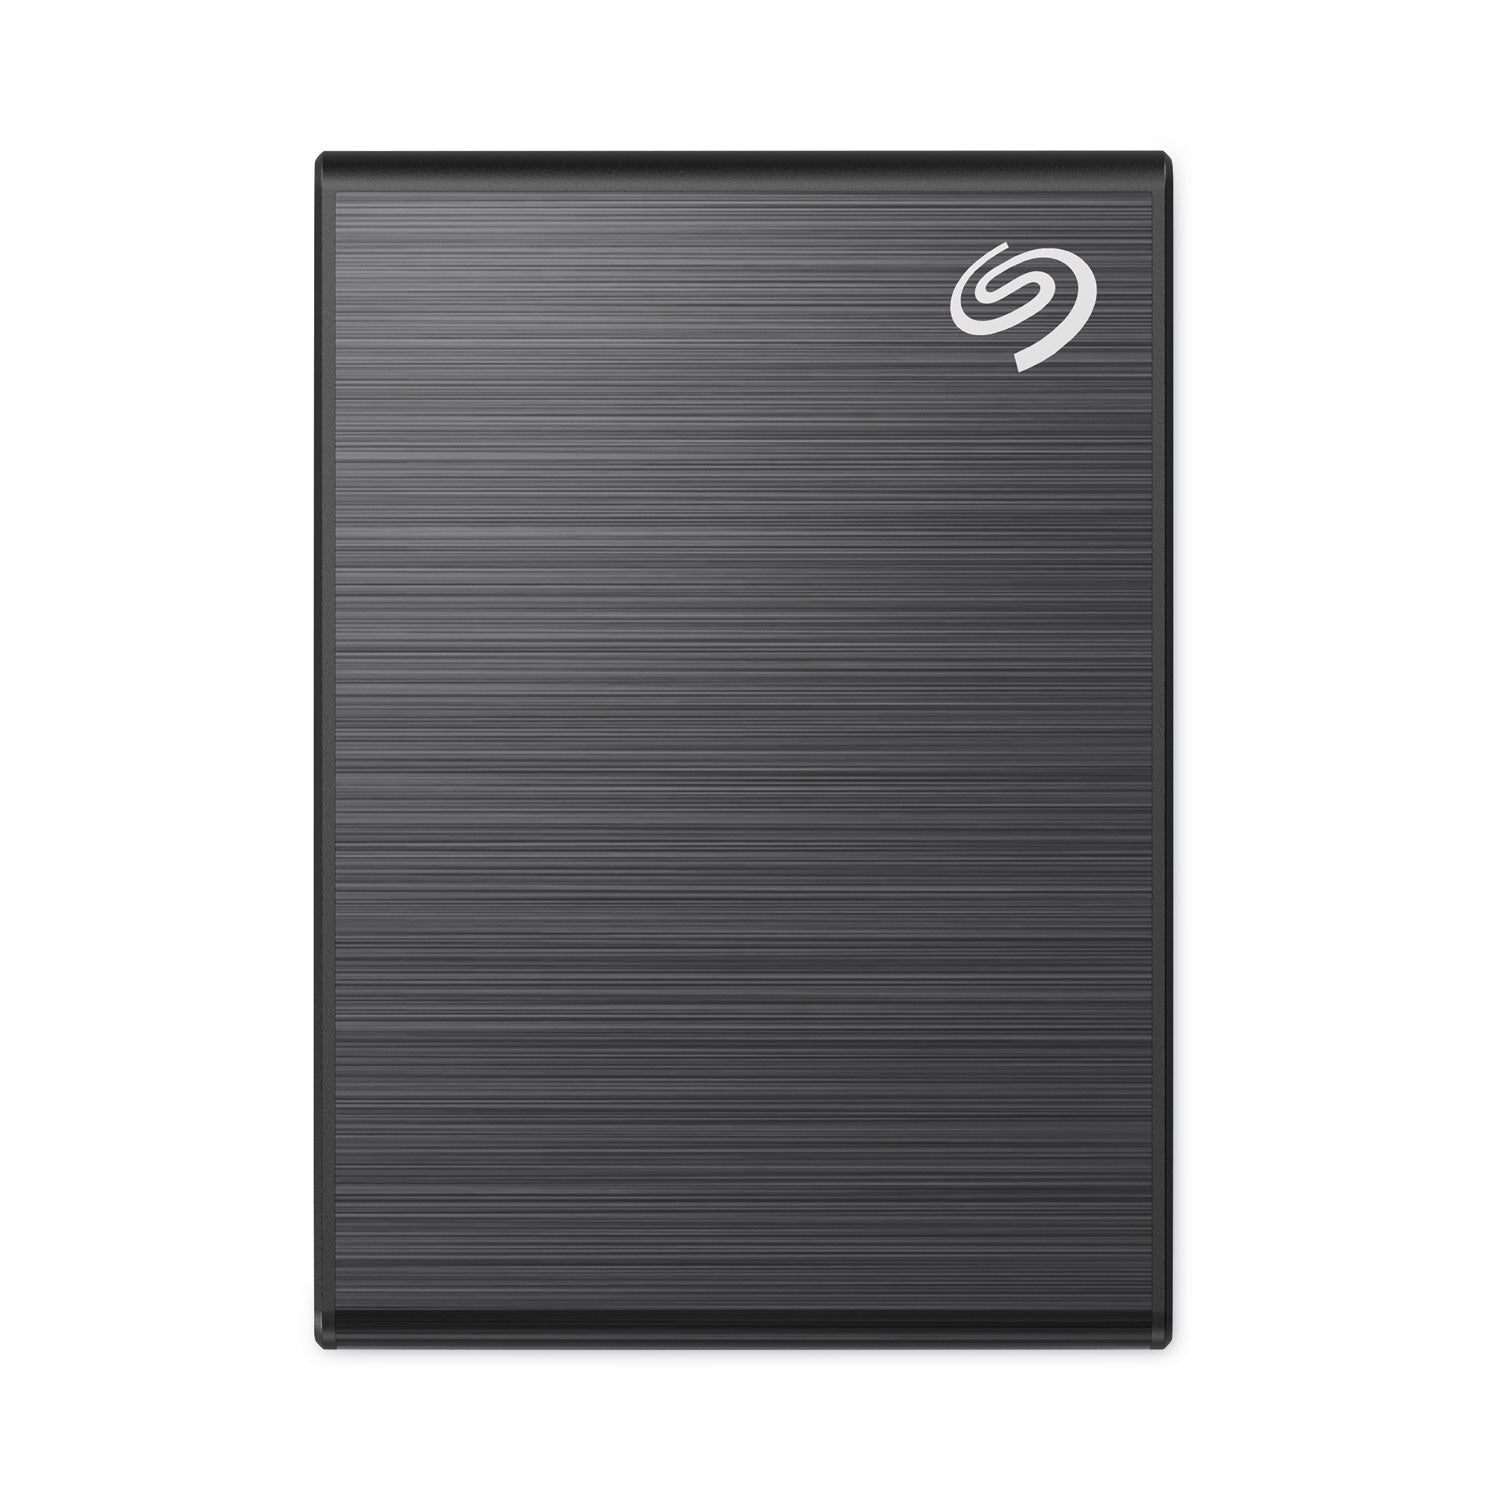 one-touch-external-solid-state-drive-1-tb-usb-30-black_sgtstkg1000400 - 6